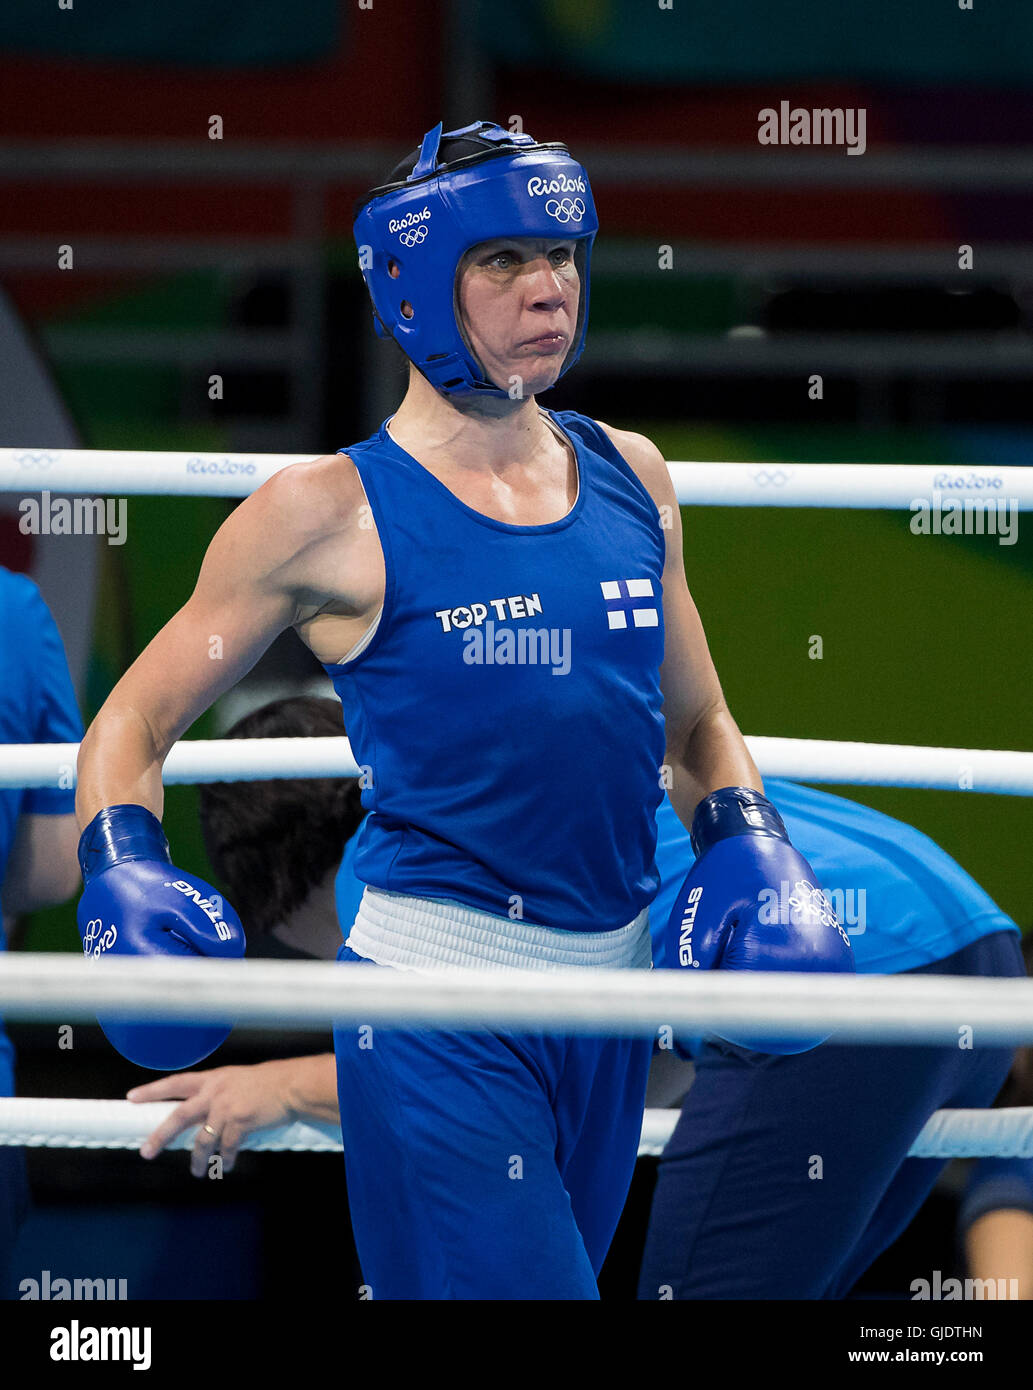 Rio De Janeiro Rj Brazil 15th Aug 2016 Olympics Boxing Mira Potkonen Fin Fights Katie Taylor Ire In Women S Boxing Light 57 60kg Quarter Finals And Moves Onto The Semifinals At Riocentro During